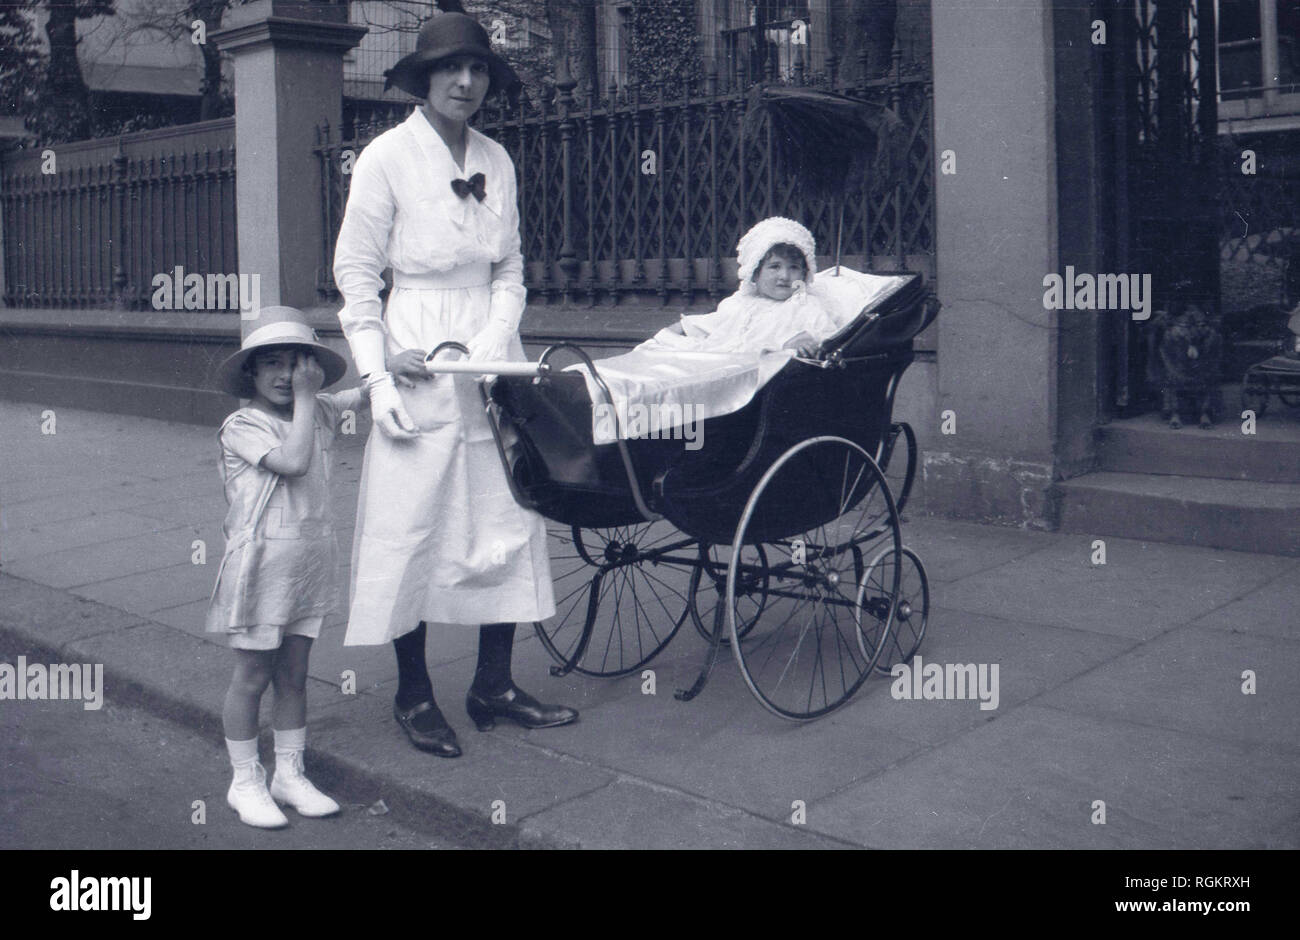 1920s, historical, on a pavement outside in a street, an elegant lady in dress of the day, possibly a nanny given her white dress, with a young girl and infant child sitting in a traditional coachbuilt baby carriage or pram, England, UK. With its large back wheels and suspension, this pram was comfortable for both the child riding in it and the mother or nanny pushing it. Stock Photo